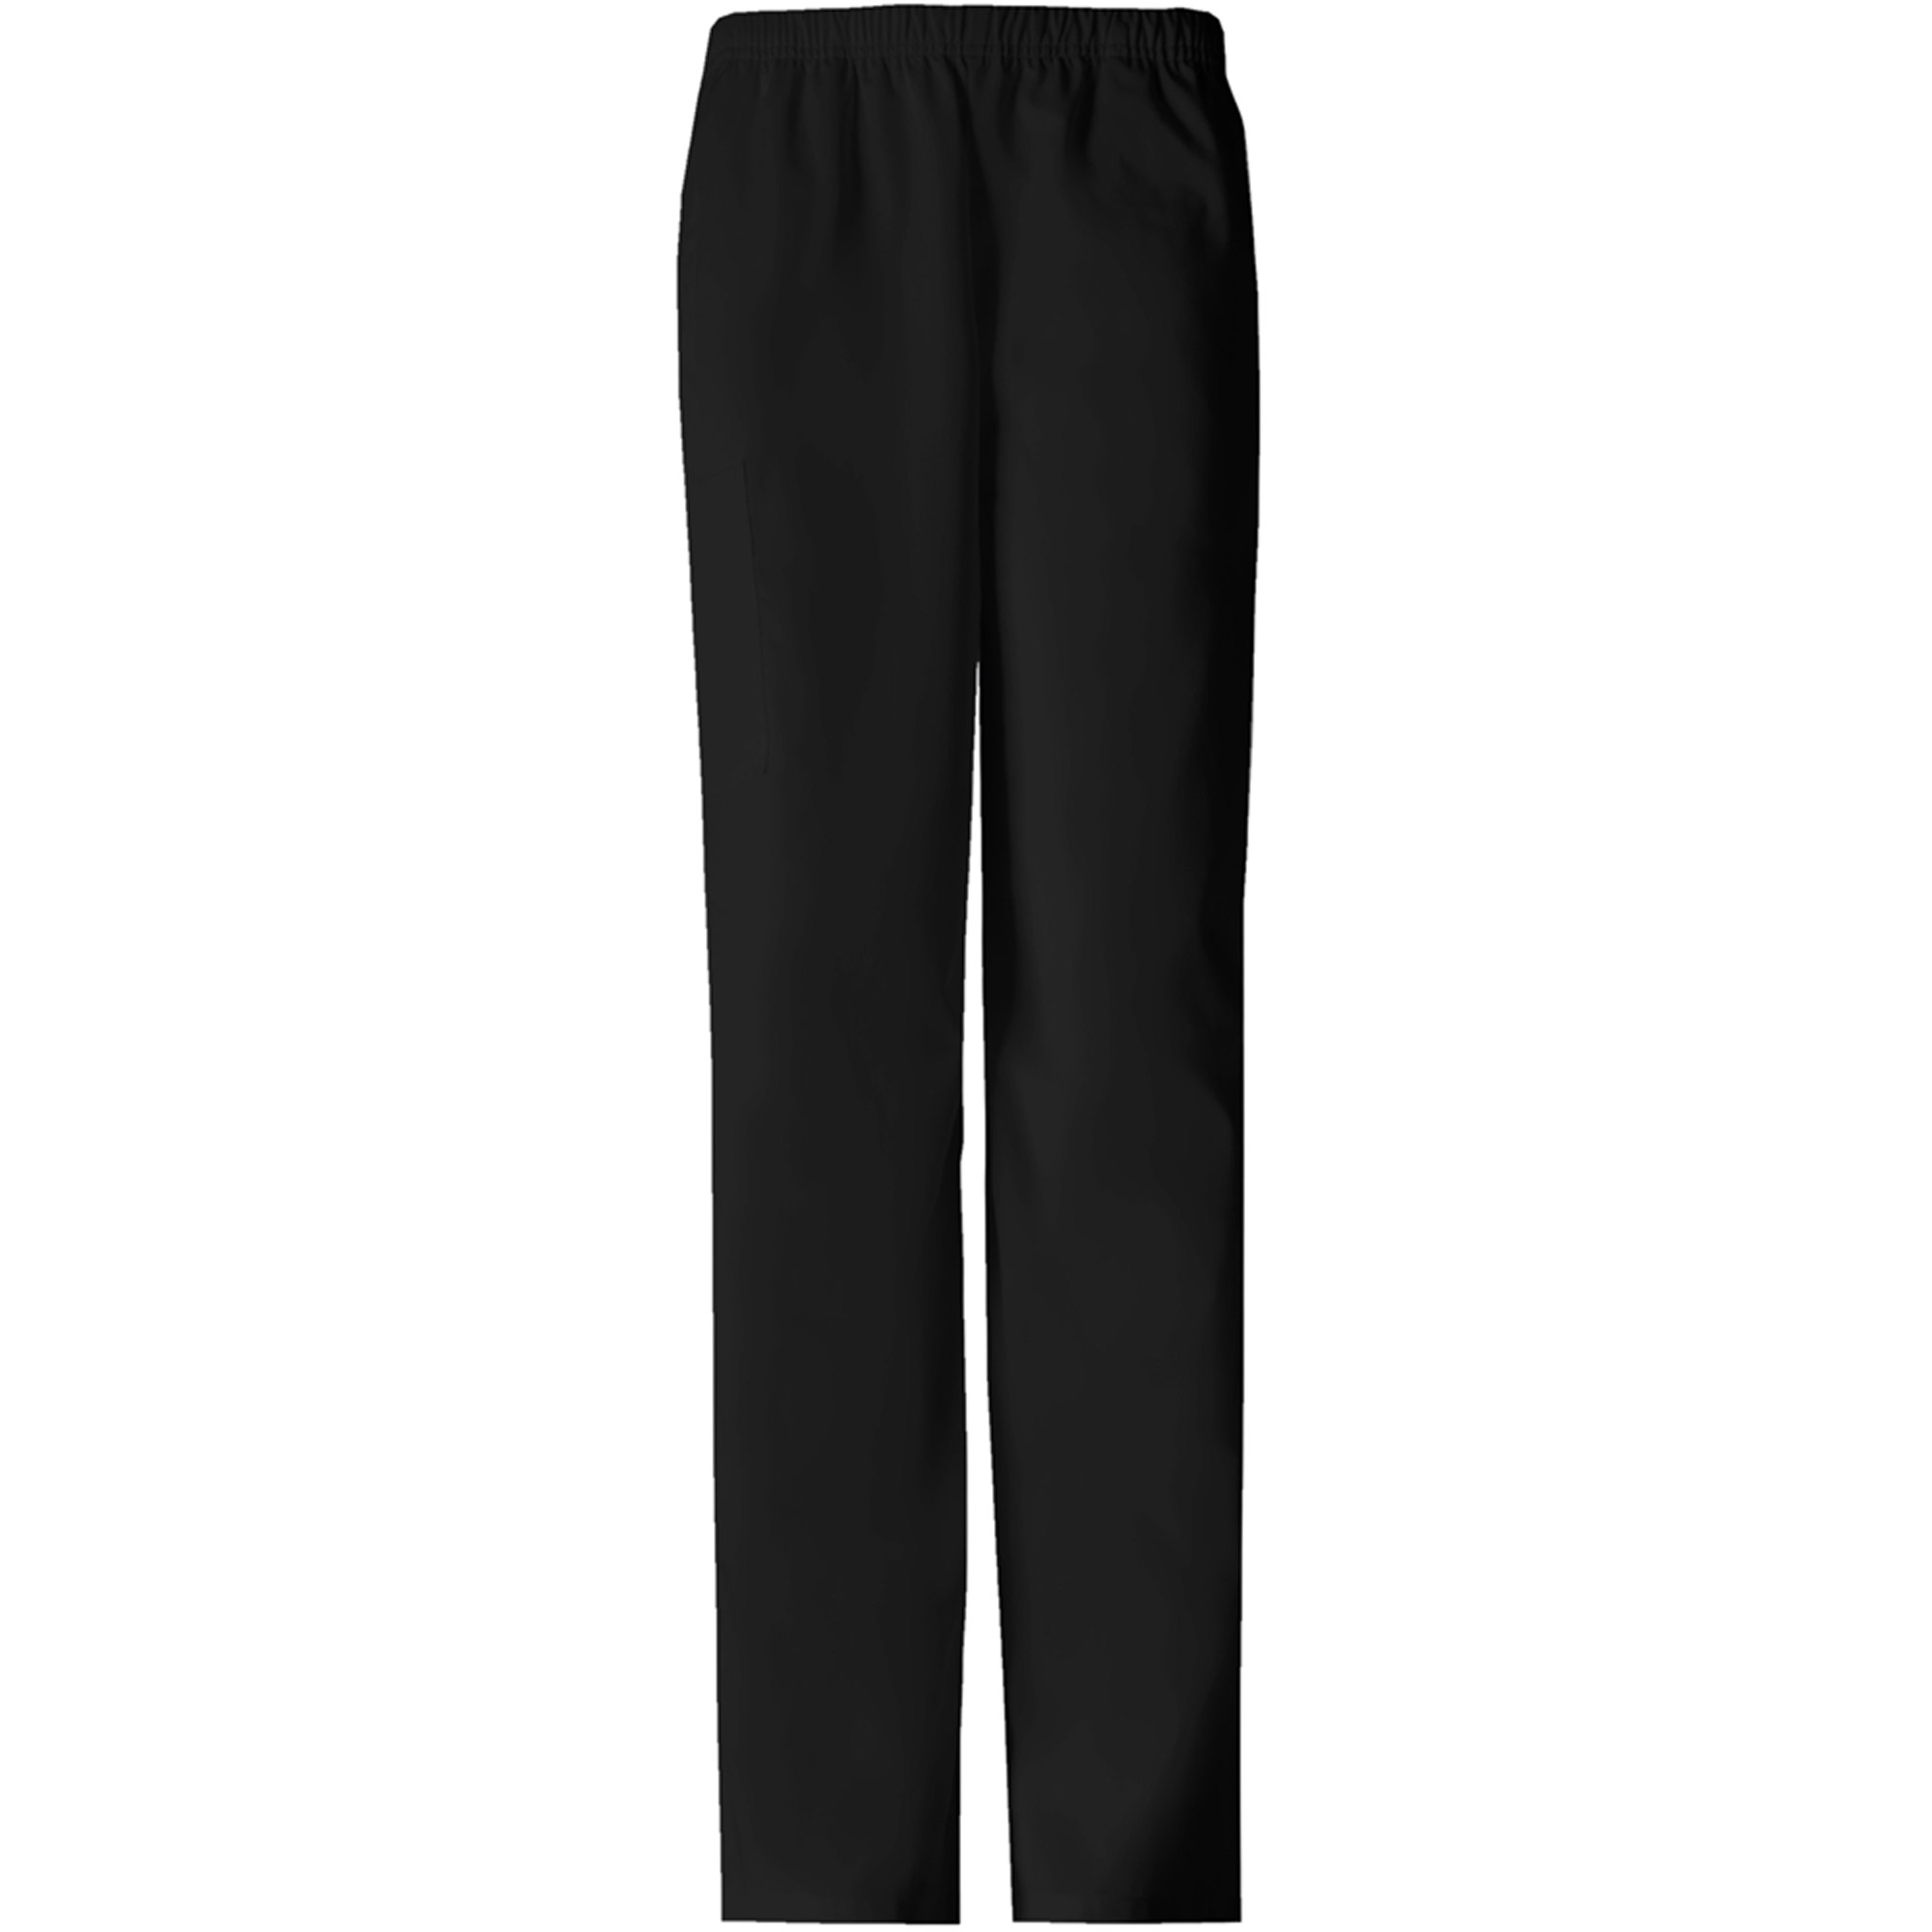 Women's Core Essentials Pull On Scrub Pant - image 1 of 2